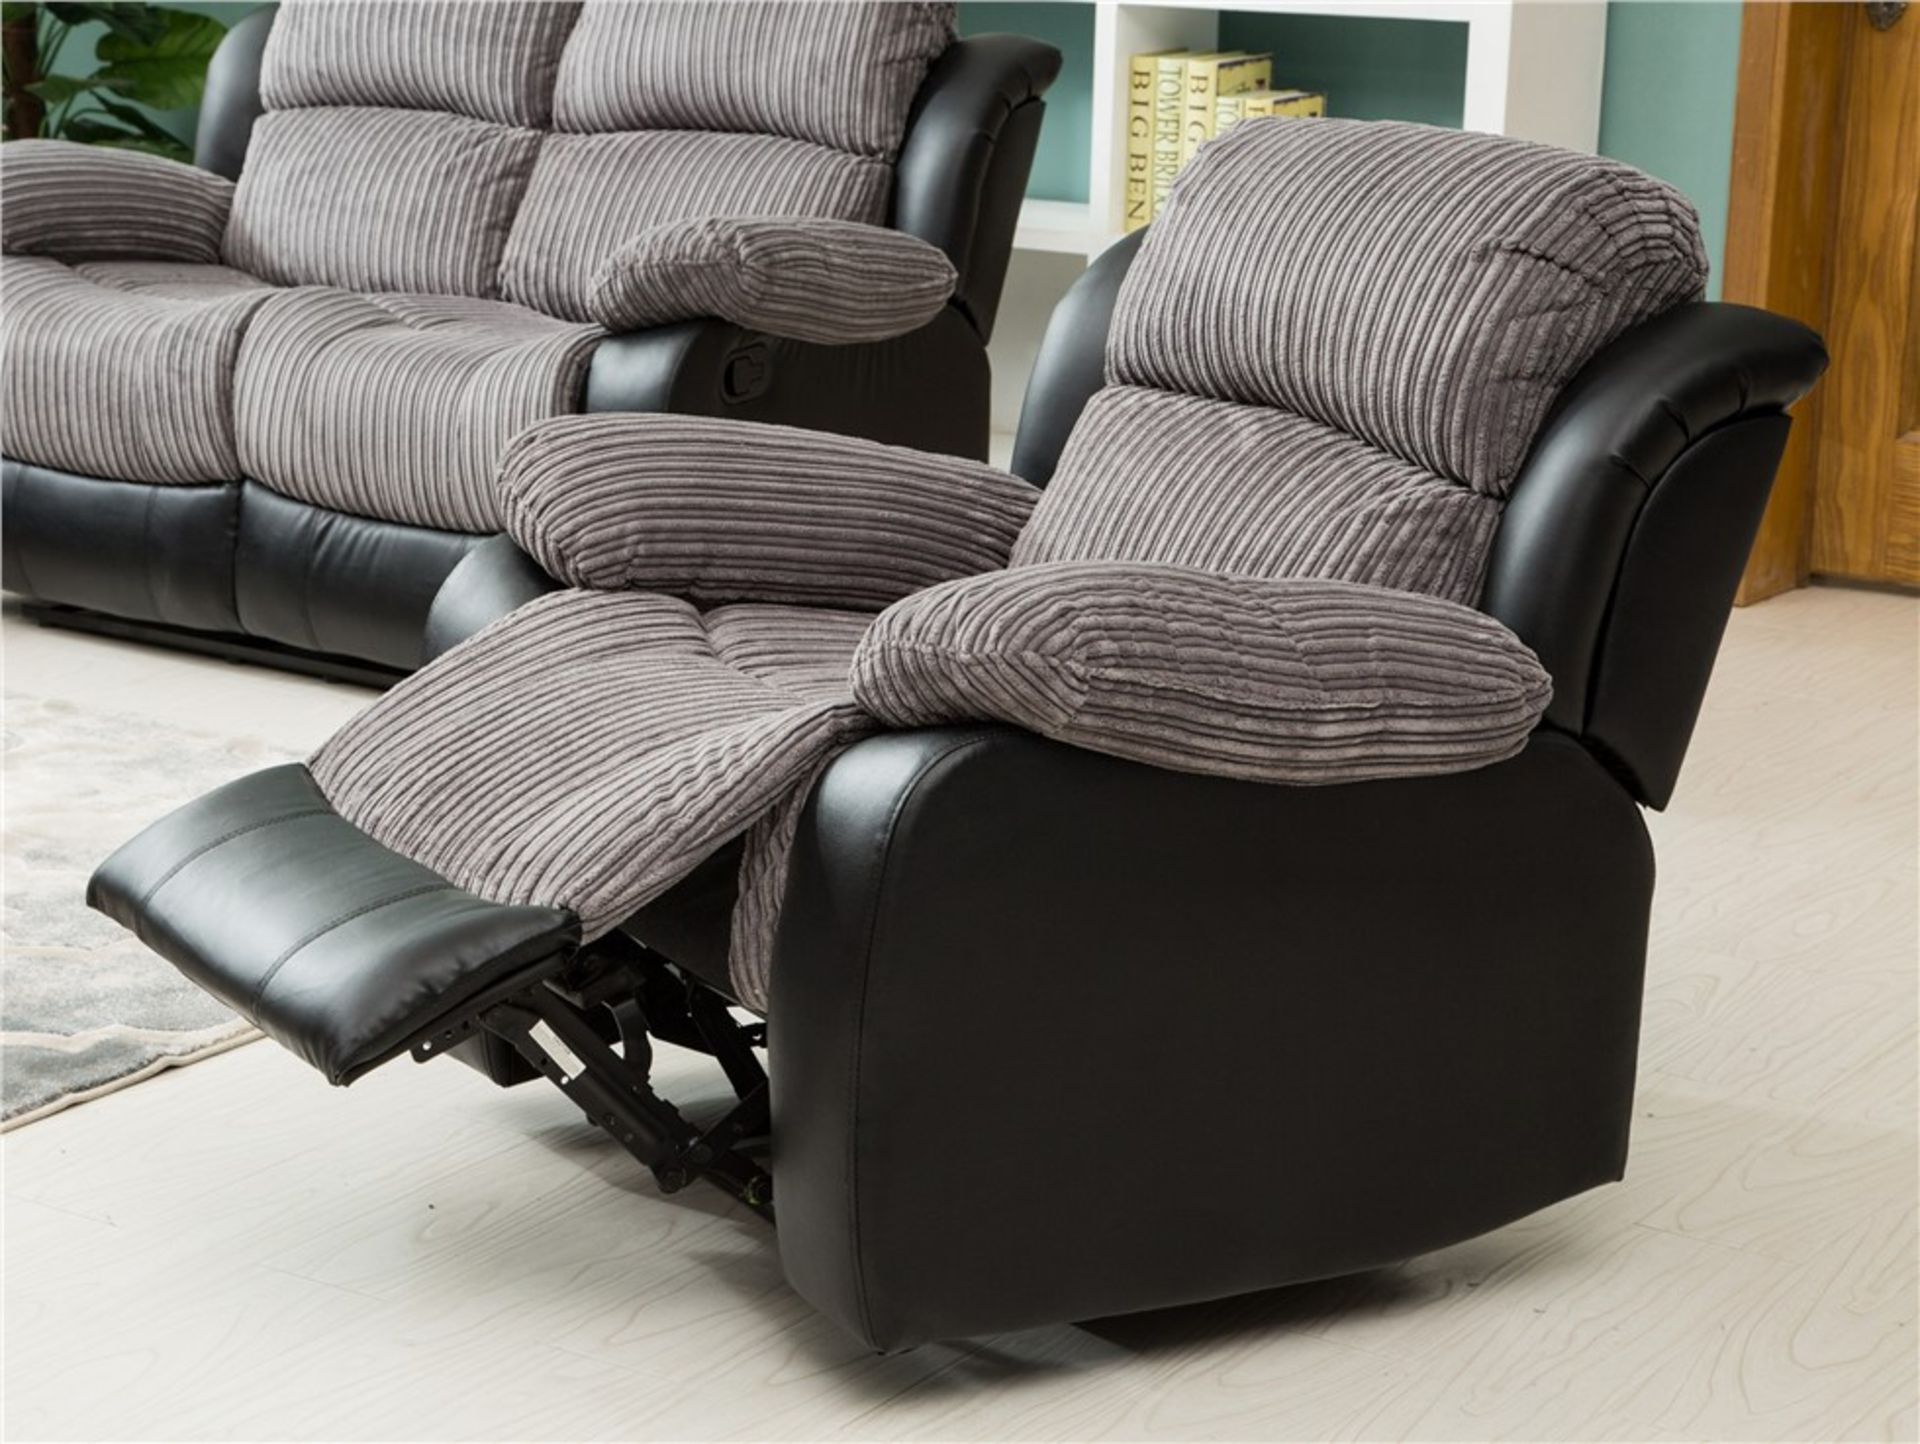 Brand new direct from the manufacturers Morrocco 3 seater reclining sofa plus 2 seater arm chair